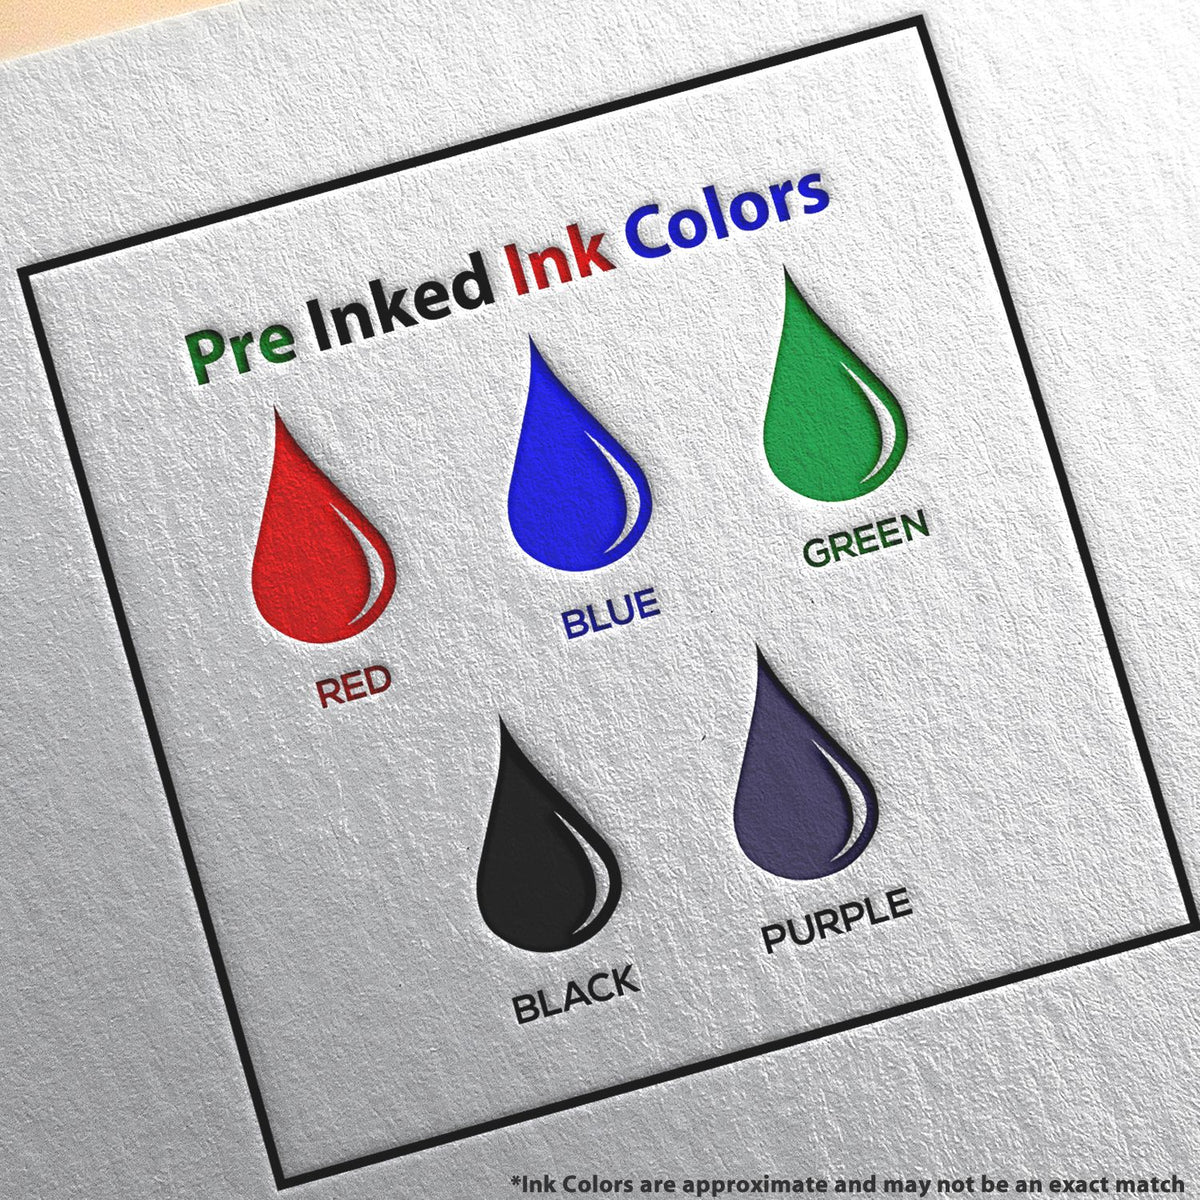 A picture showing the different ink colors or hues available for the Super Slim Puerto Rico Notary Public Stamp product.